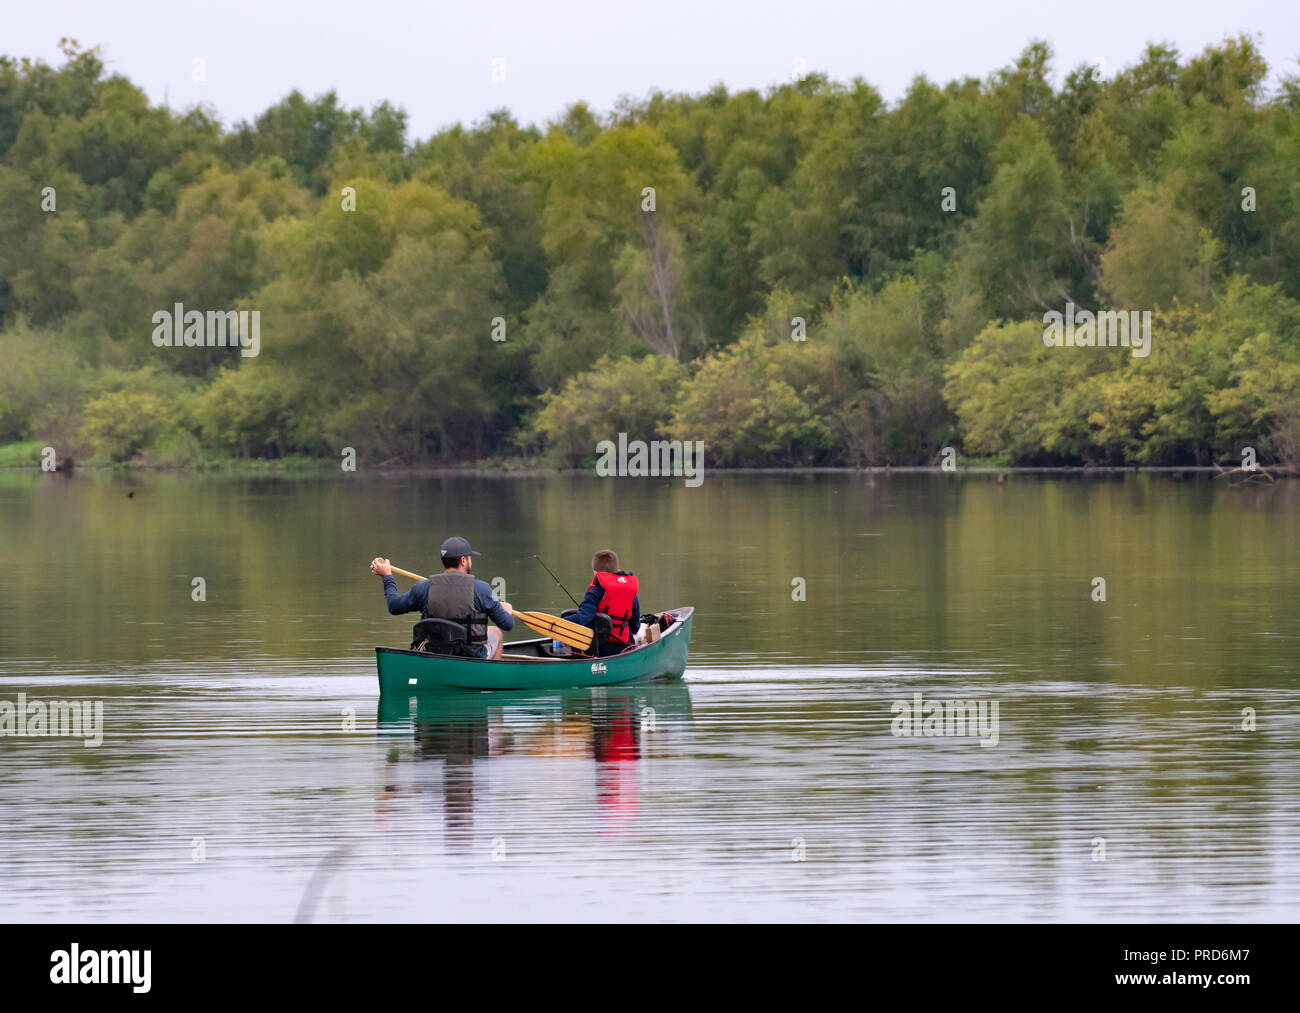 BOSSIER PARISH, LA., U.S.A., SEPT. 29, 2018: A man and boy are seen from the rear in a canoe on a beautiful, quiet lake during a fishing trip. Stock Photo